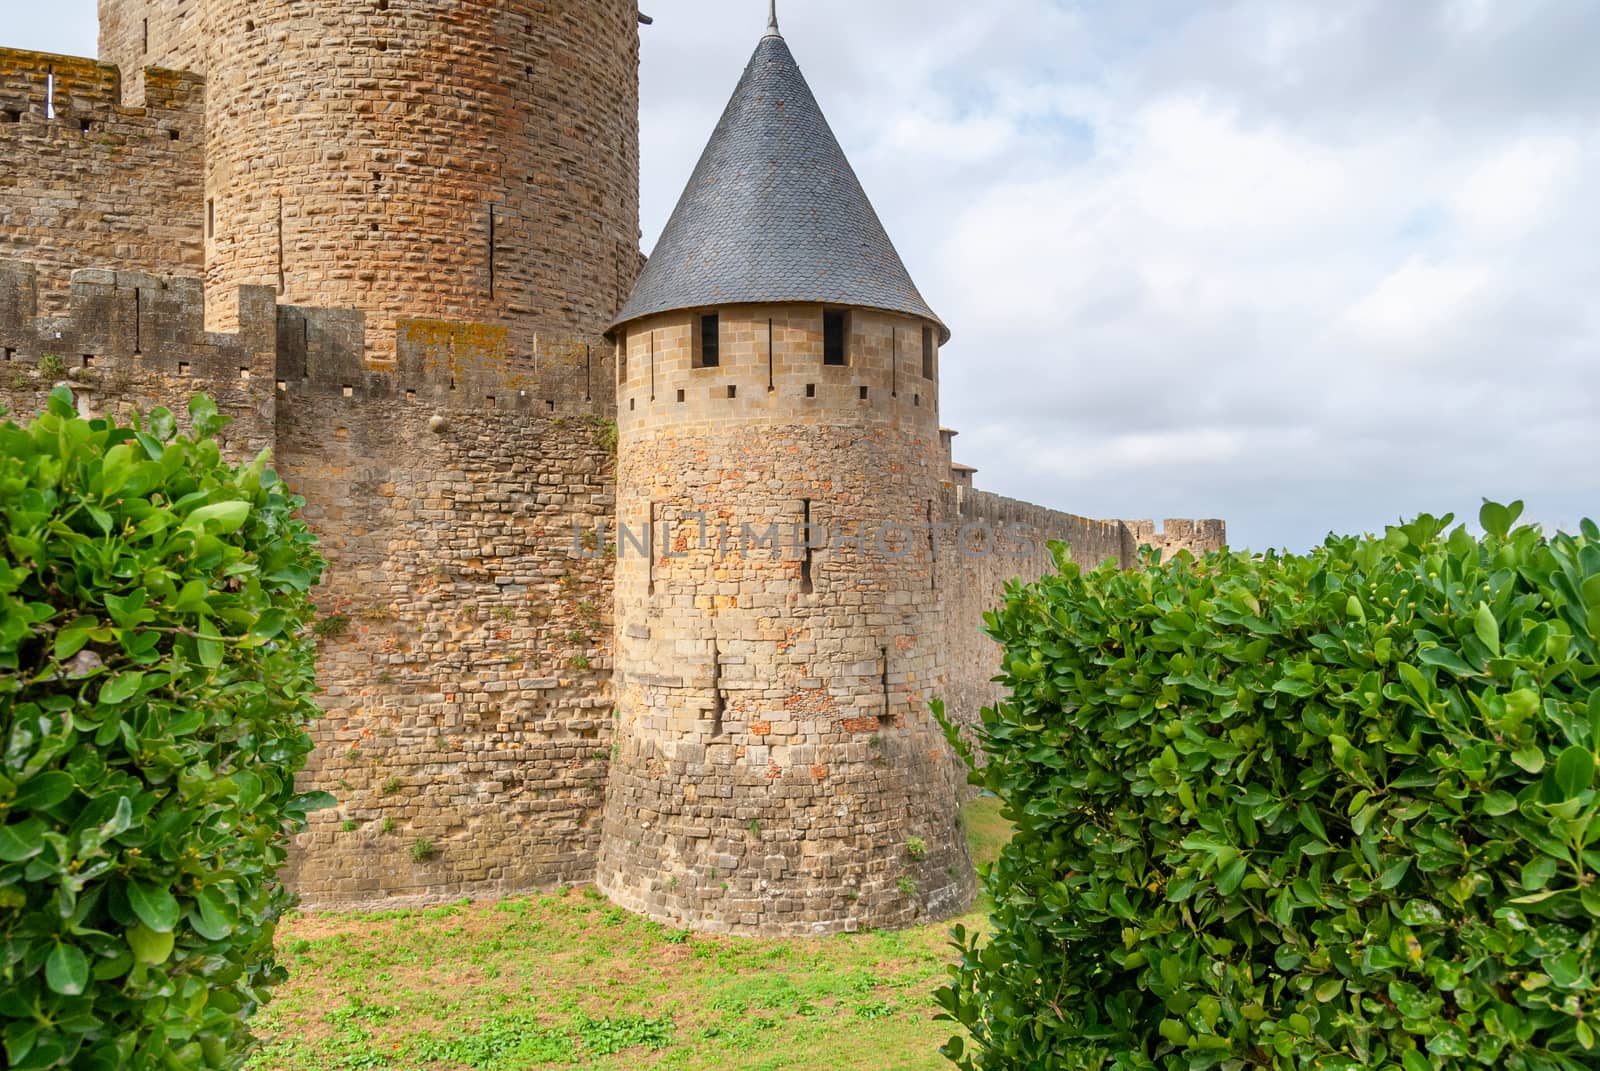 Medieval Castle Carcassonne in the South of France by Zhukow